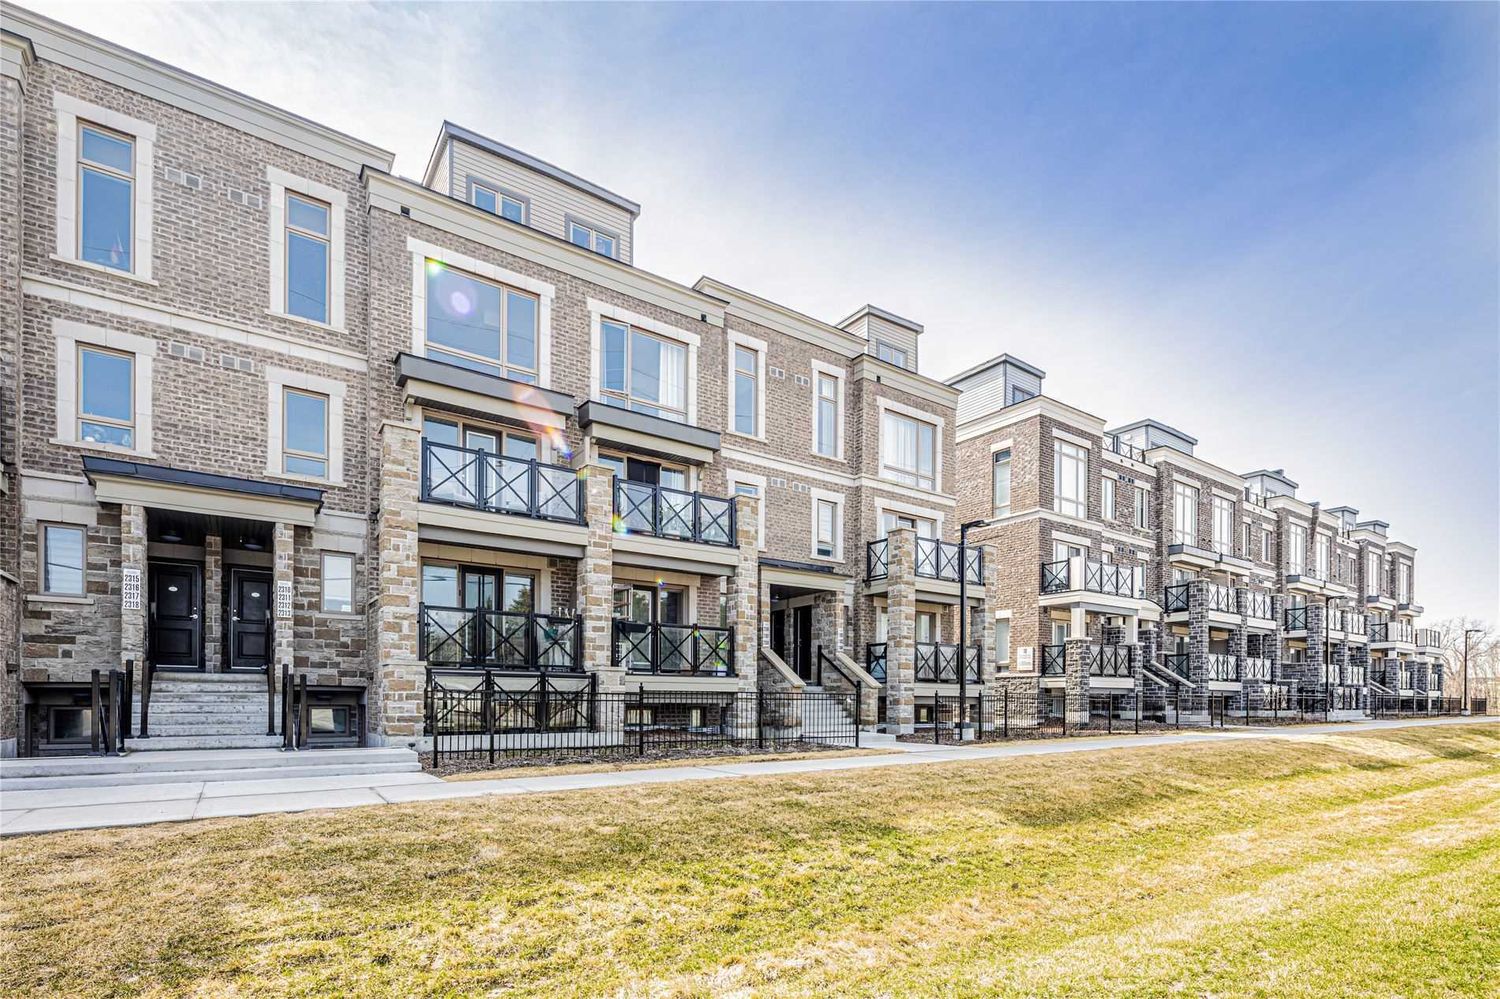 2-21 Westmeath Lane. Grand Cornell Brownstones 2 is located in  Markham, Toronto - image #2 of 2